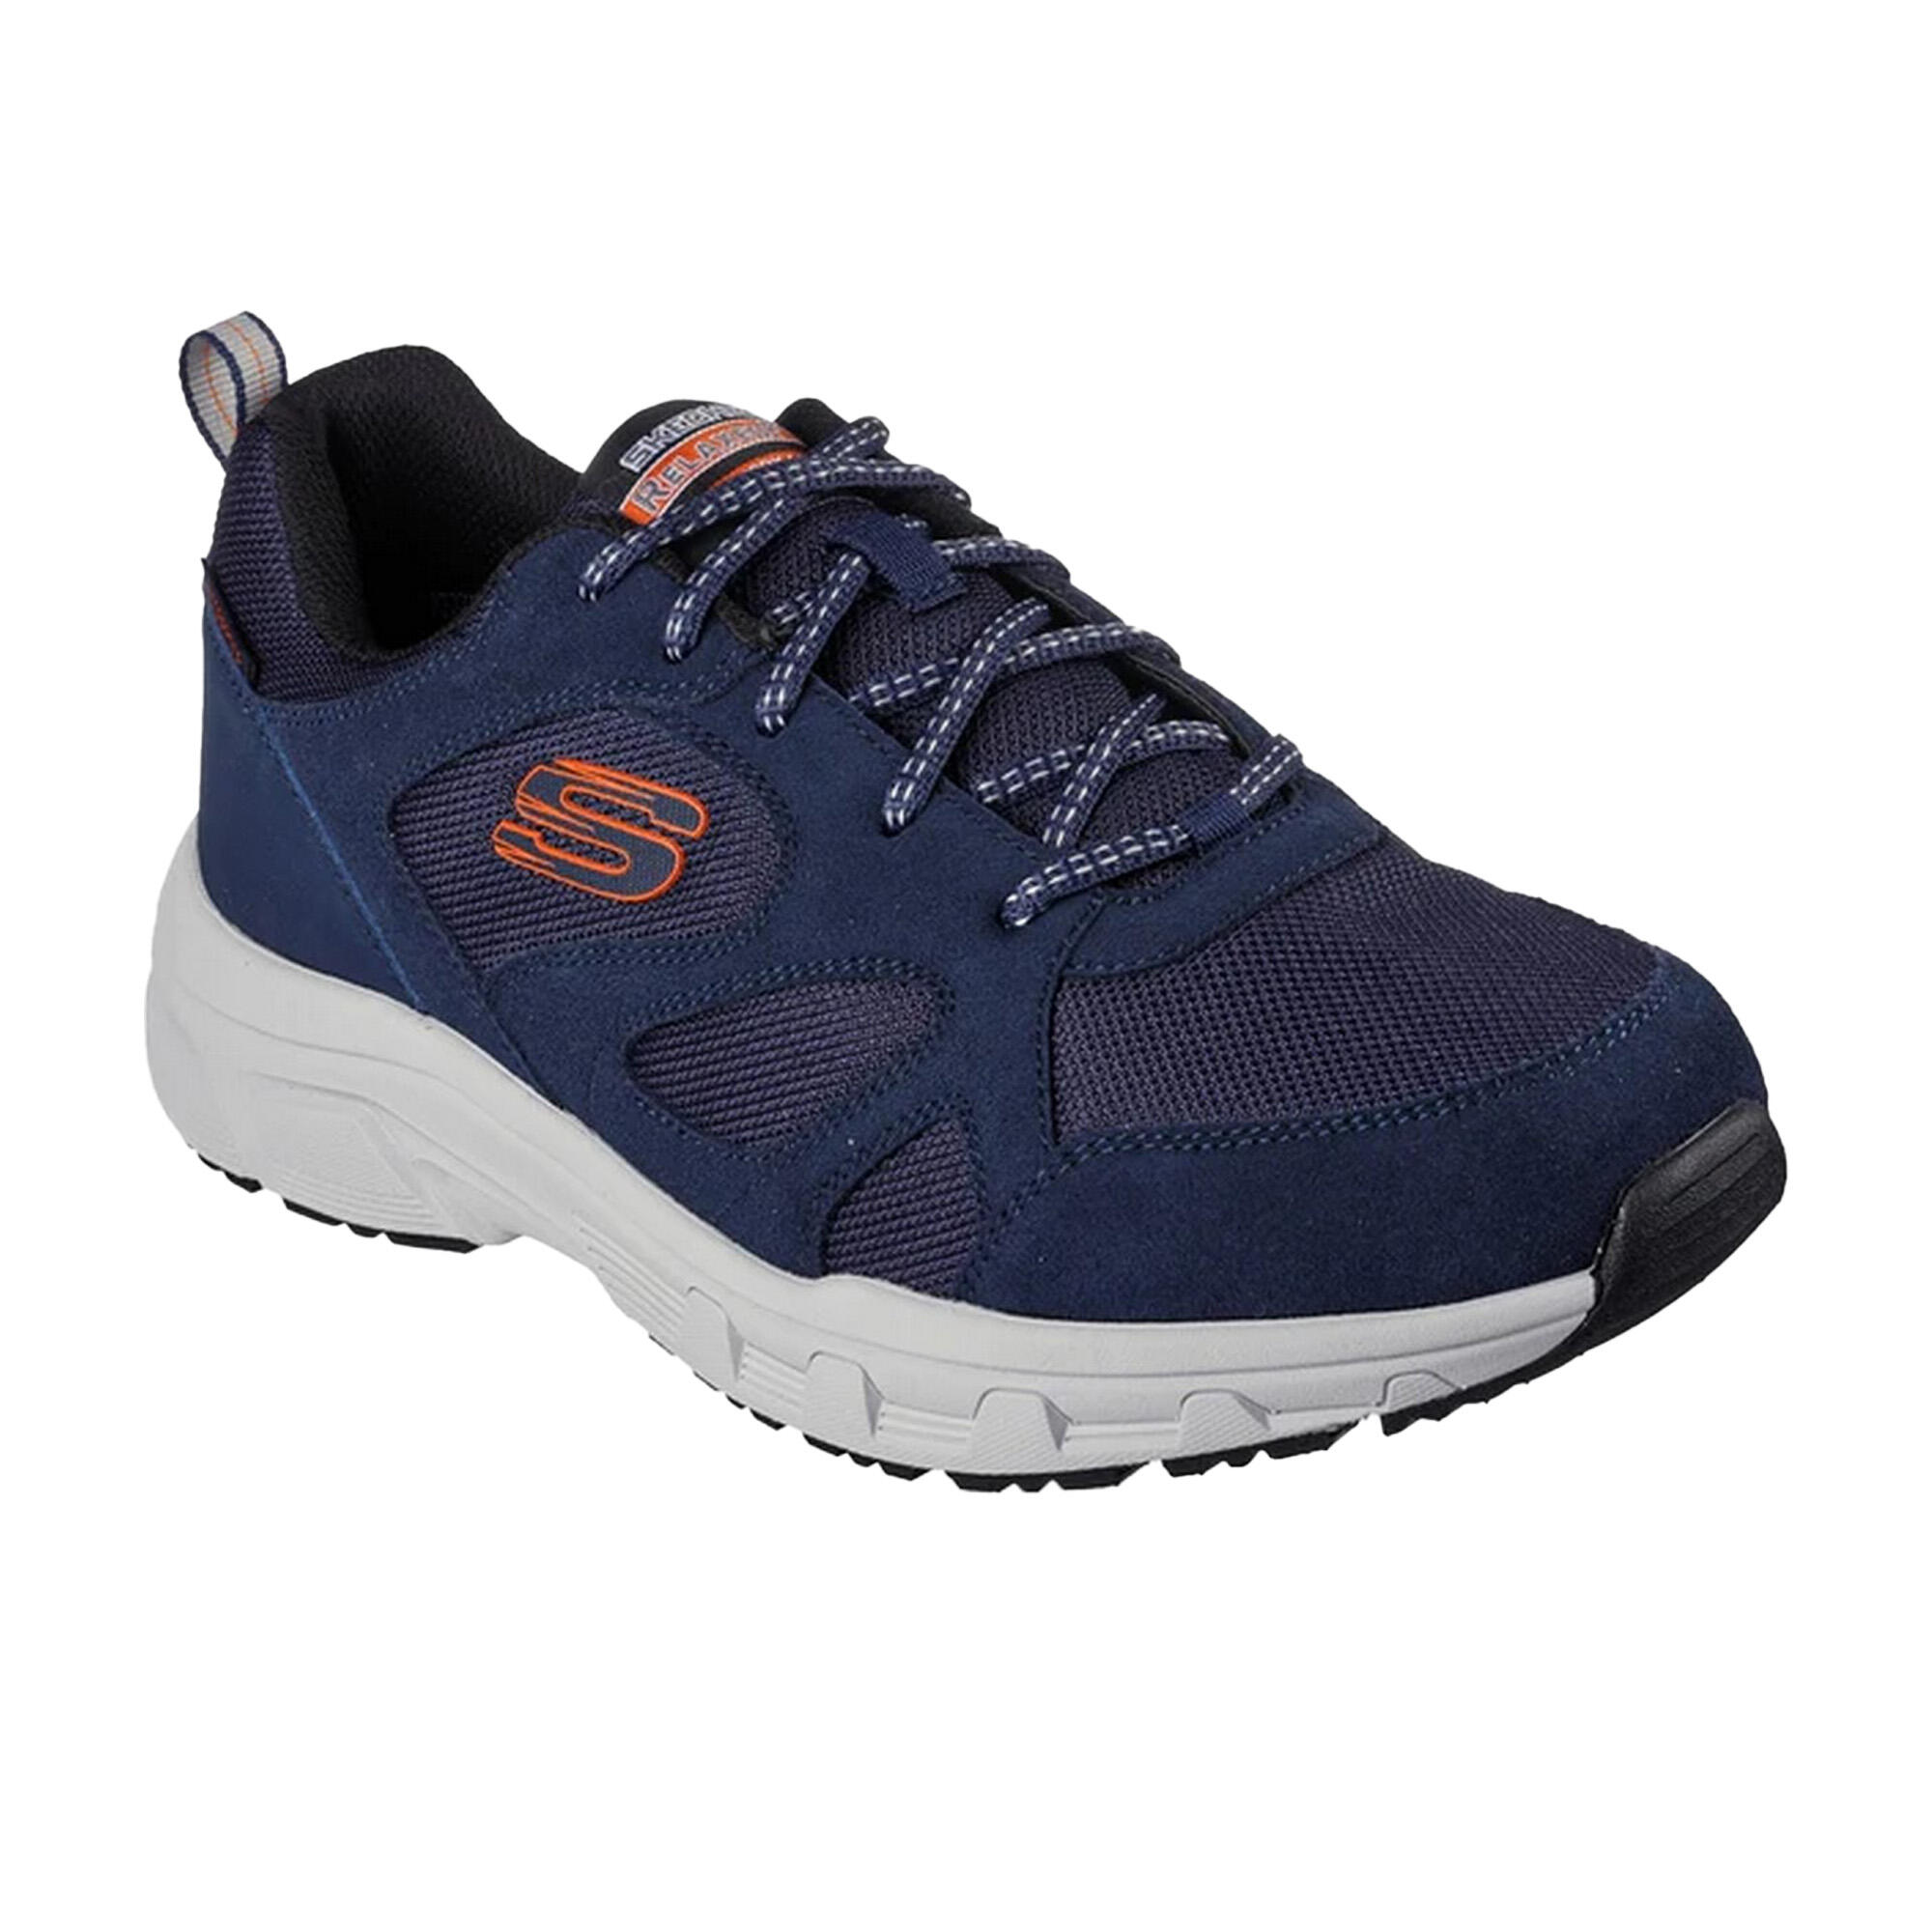 SKECHERS Mens Oak Canyon Sunfair Suede Relaxed Fit Trainers (Navy/Orange)